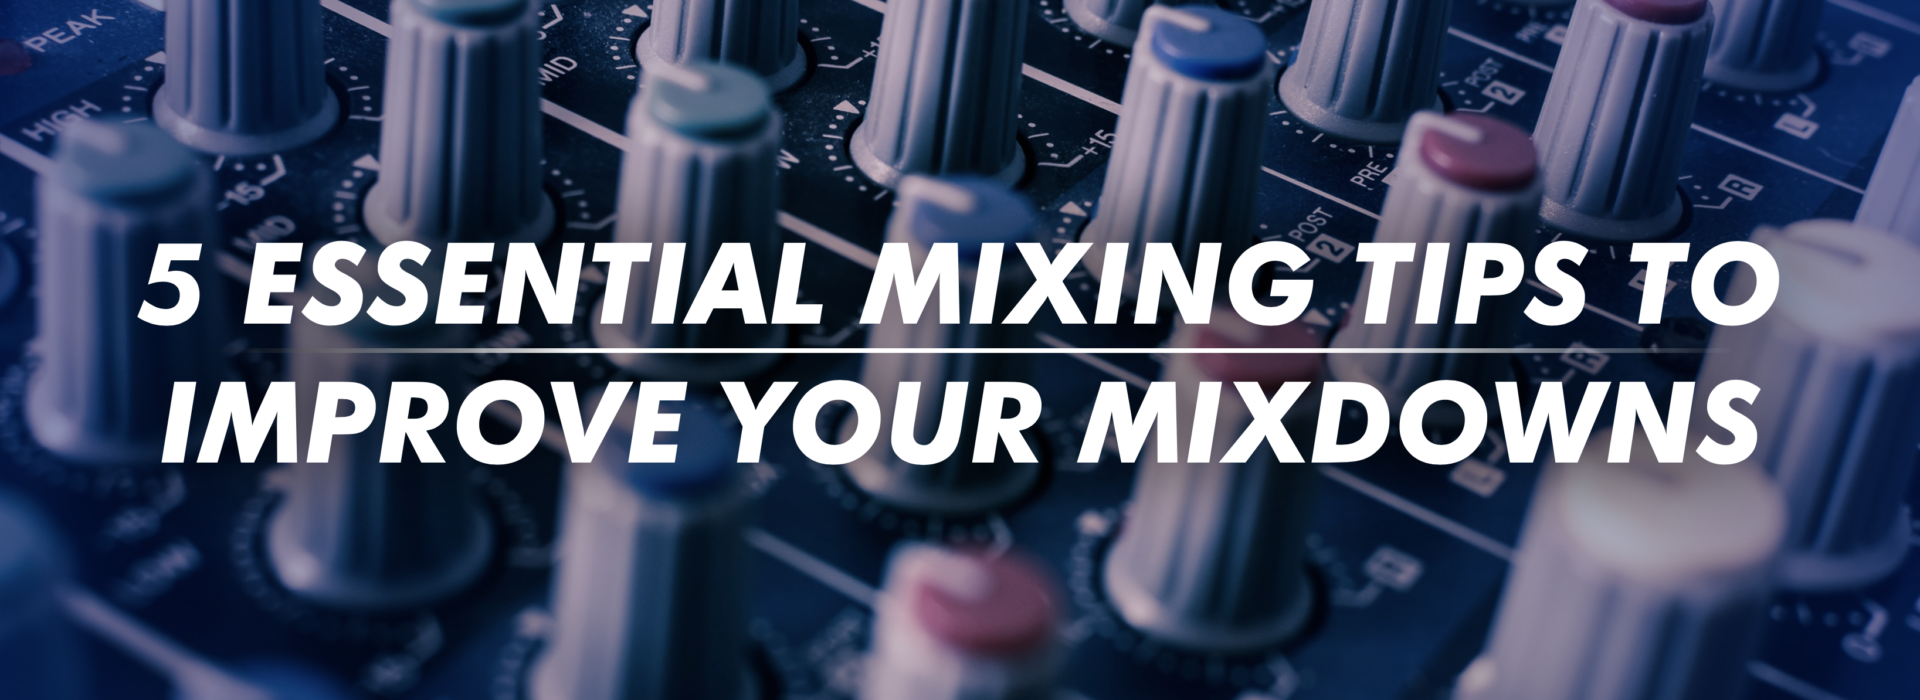 5 Essential Mixing Tips to Improve Your Mixdowns